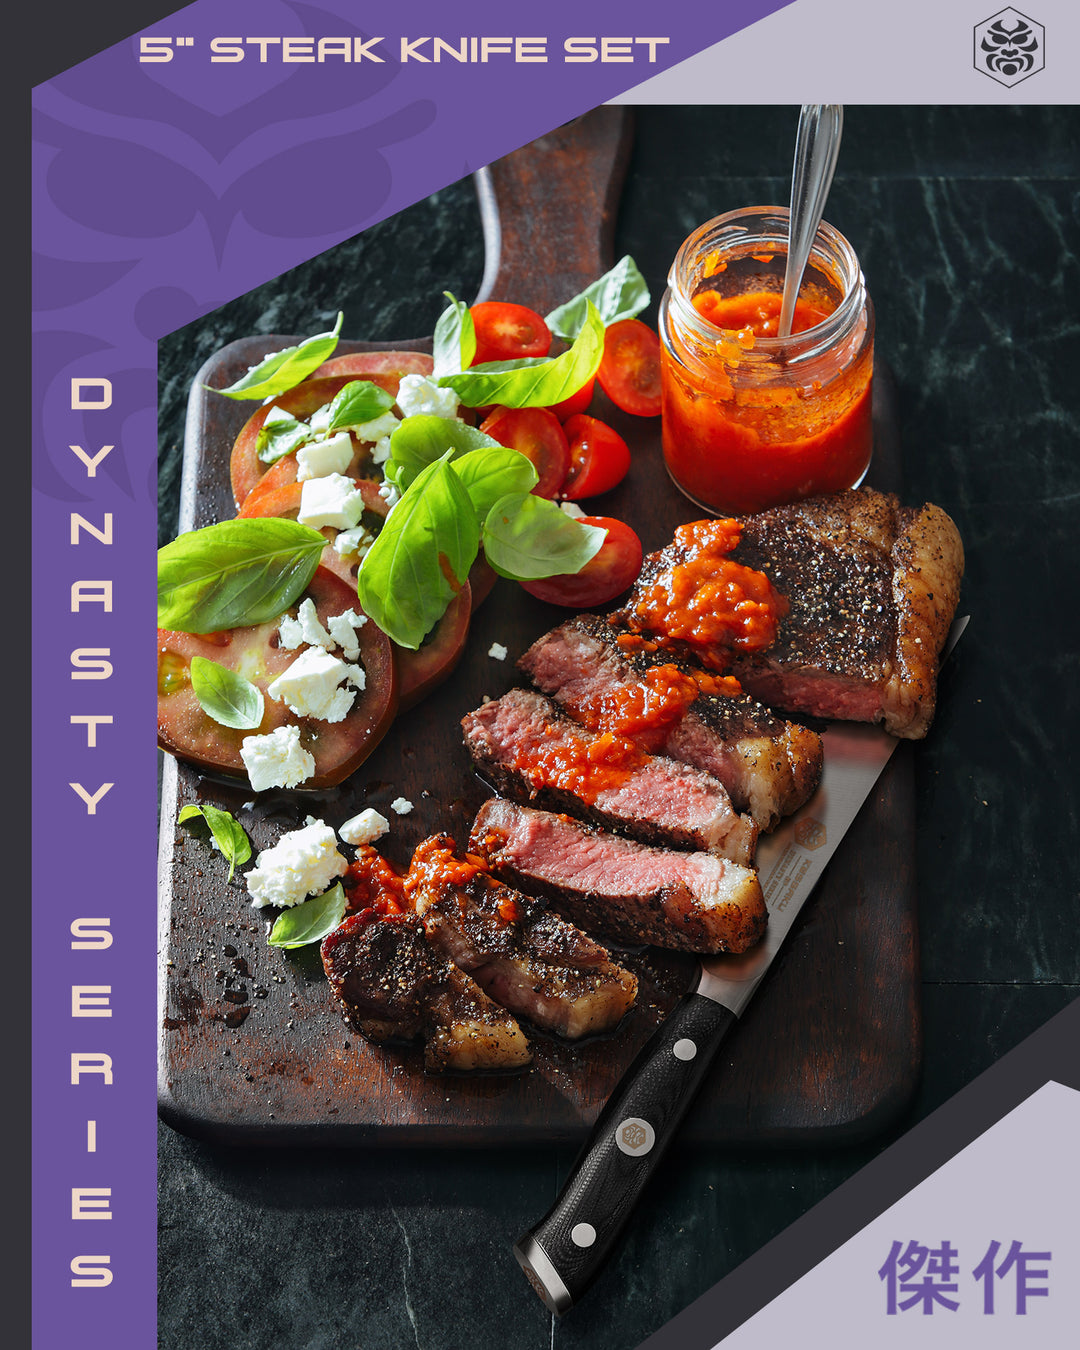 A Dynasty Steak Knife with slices of steak and tomato, basil, crumbled feta and chutney